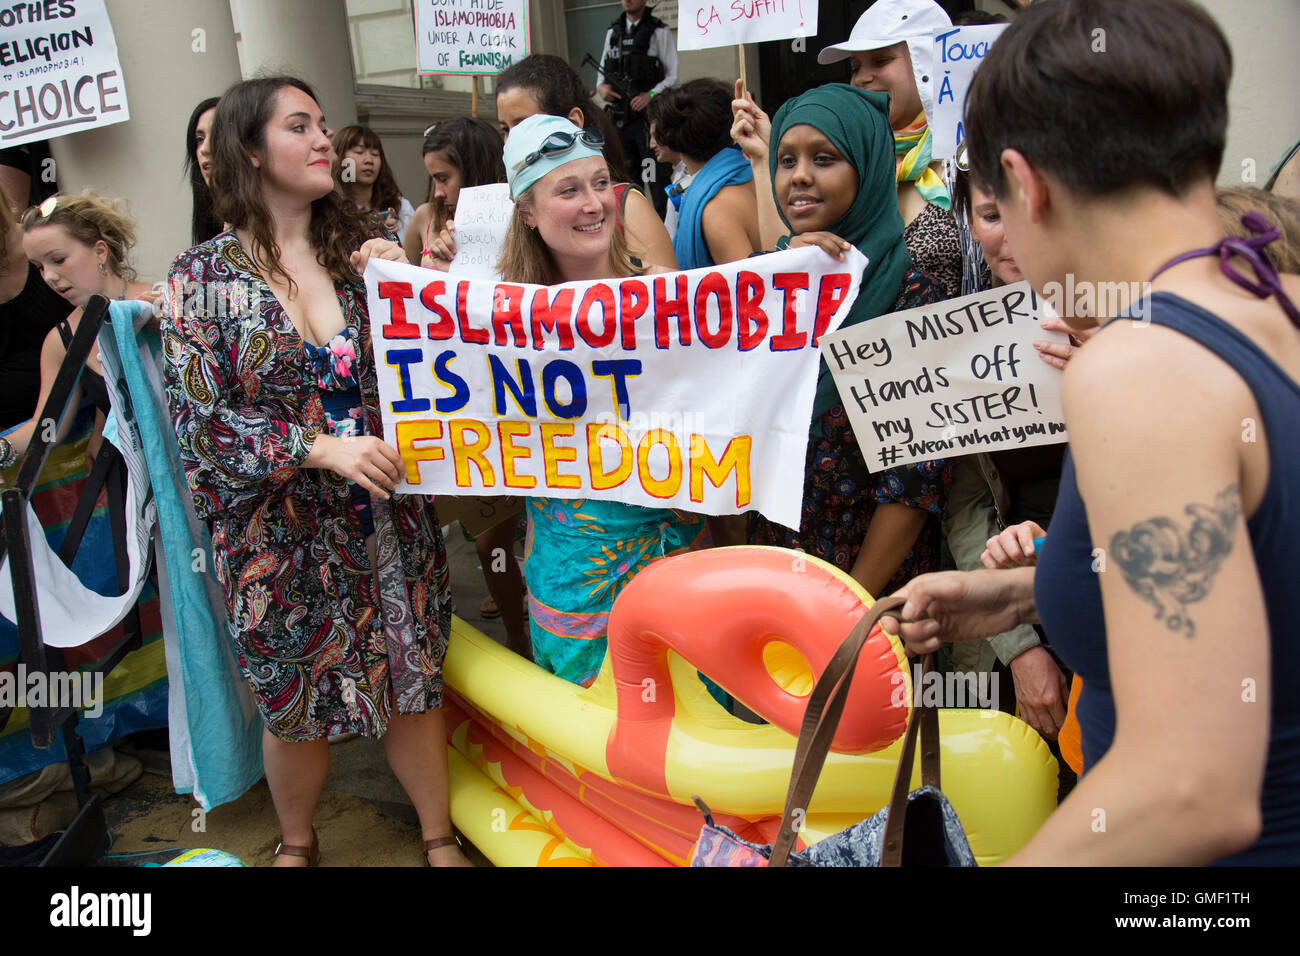 London, UK. 25th August, 2016. Wear what you want protest at the French embassy against the burkini ban for Muslim women on France’s beaches on 25th August 2016 in London, United Kingdom. Activists called on fellow supporters to descend on Knightsbridge saying “Come along to the French embassy and wear what you want - burkinis, bikinis, anything goes. Bring beach gear: beach umbrellas, towels, bat and ball, boules... Credit:  Michael Kemp/Alamy Live News Stock Photo